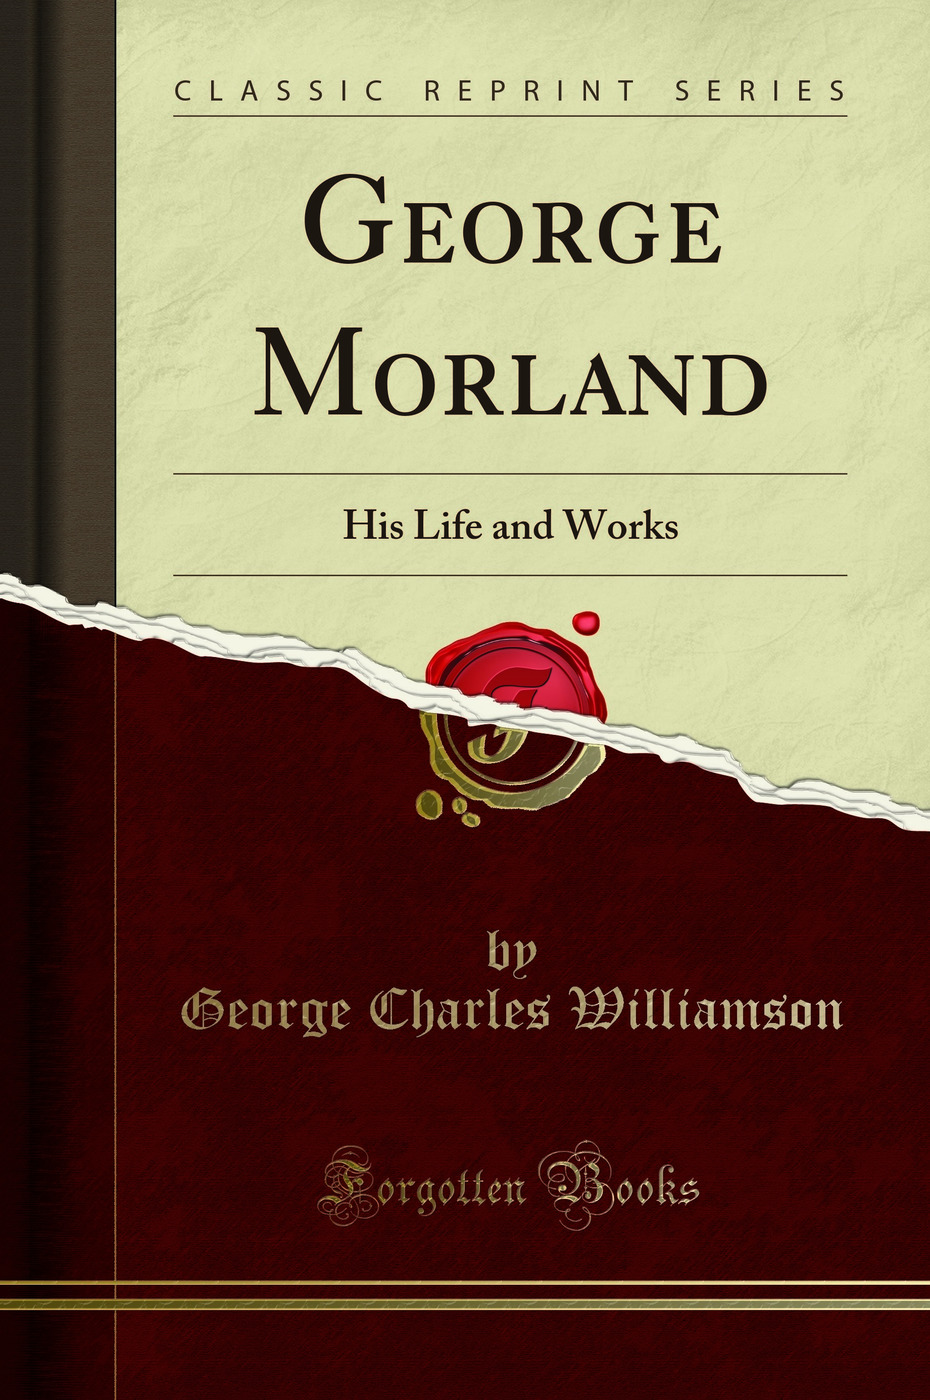 George Morland: His Life and Works (Classic Reprint) - George Charles Williamson